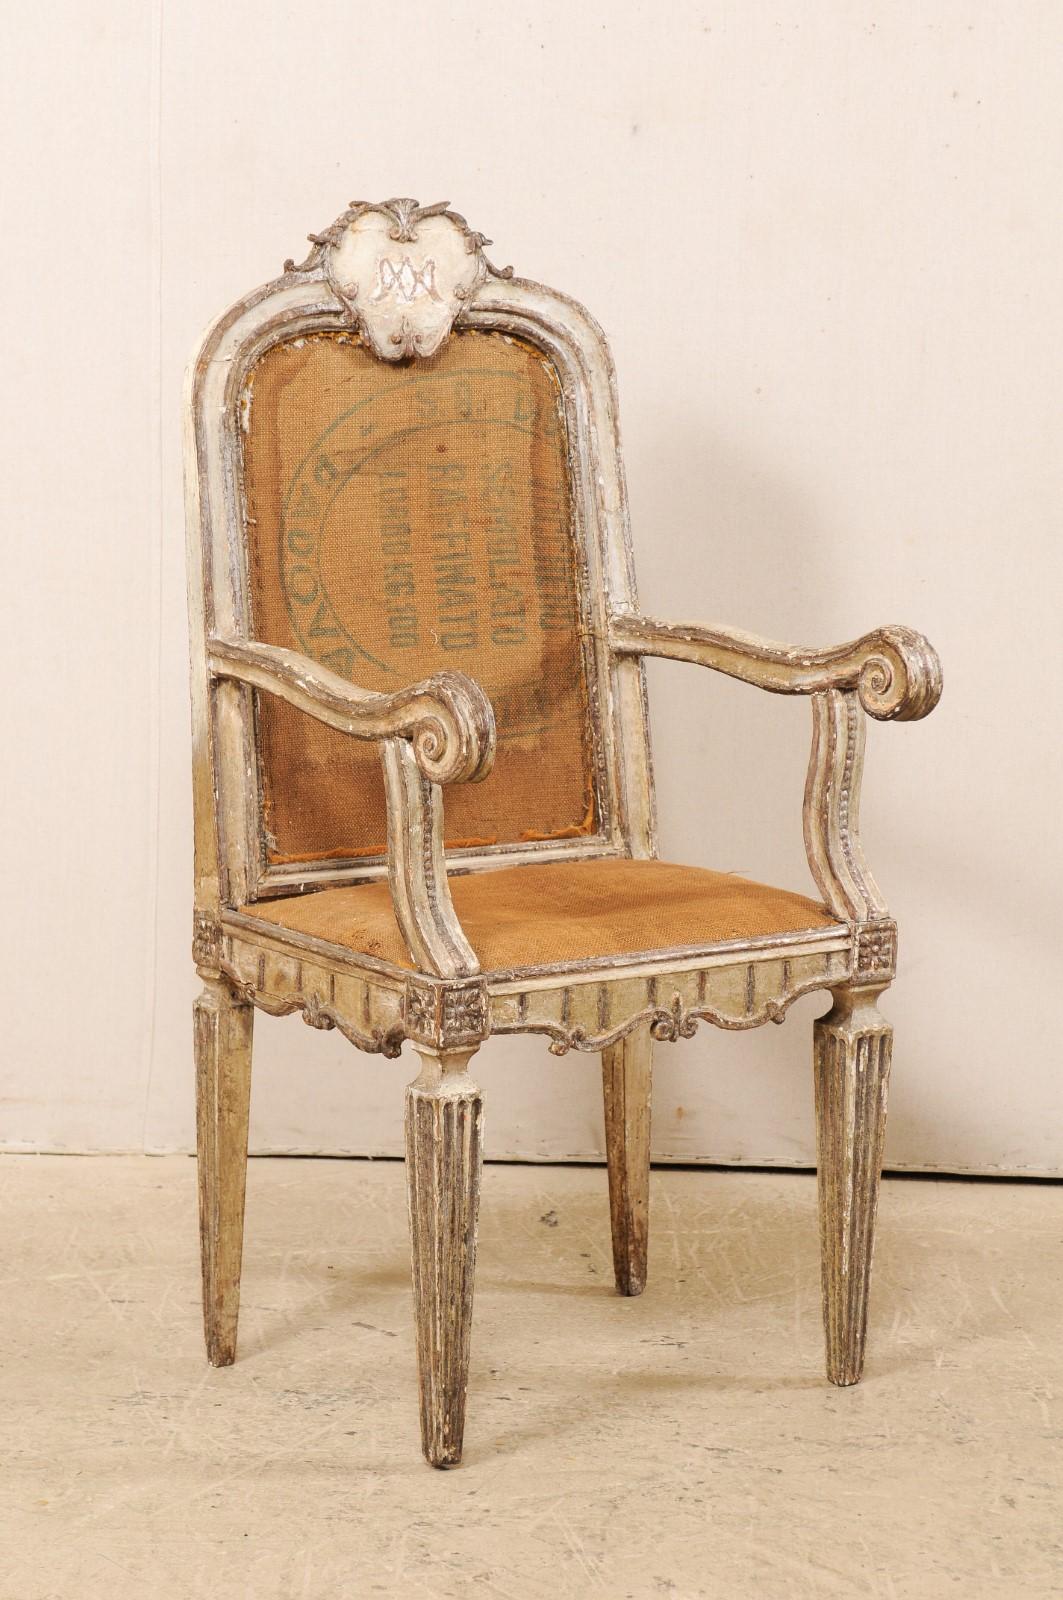 A single Italian carved-wood accent armchair from the 18th century. This antique chair from Italy has a nicely carved stylized plaque adorning its back rail crest. Gently curved arms terminate into scrolled knuckles. The seat and arch-shaped back